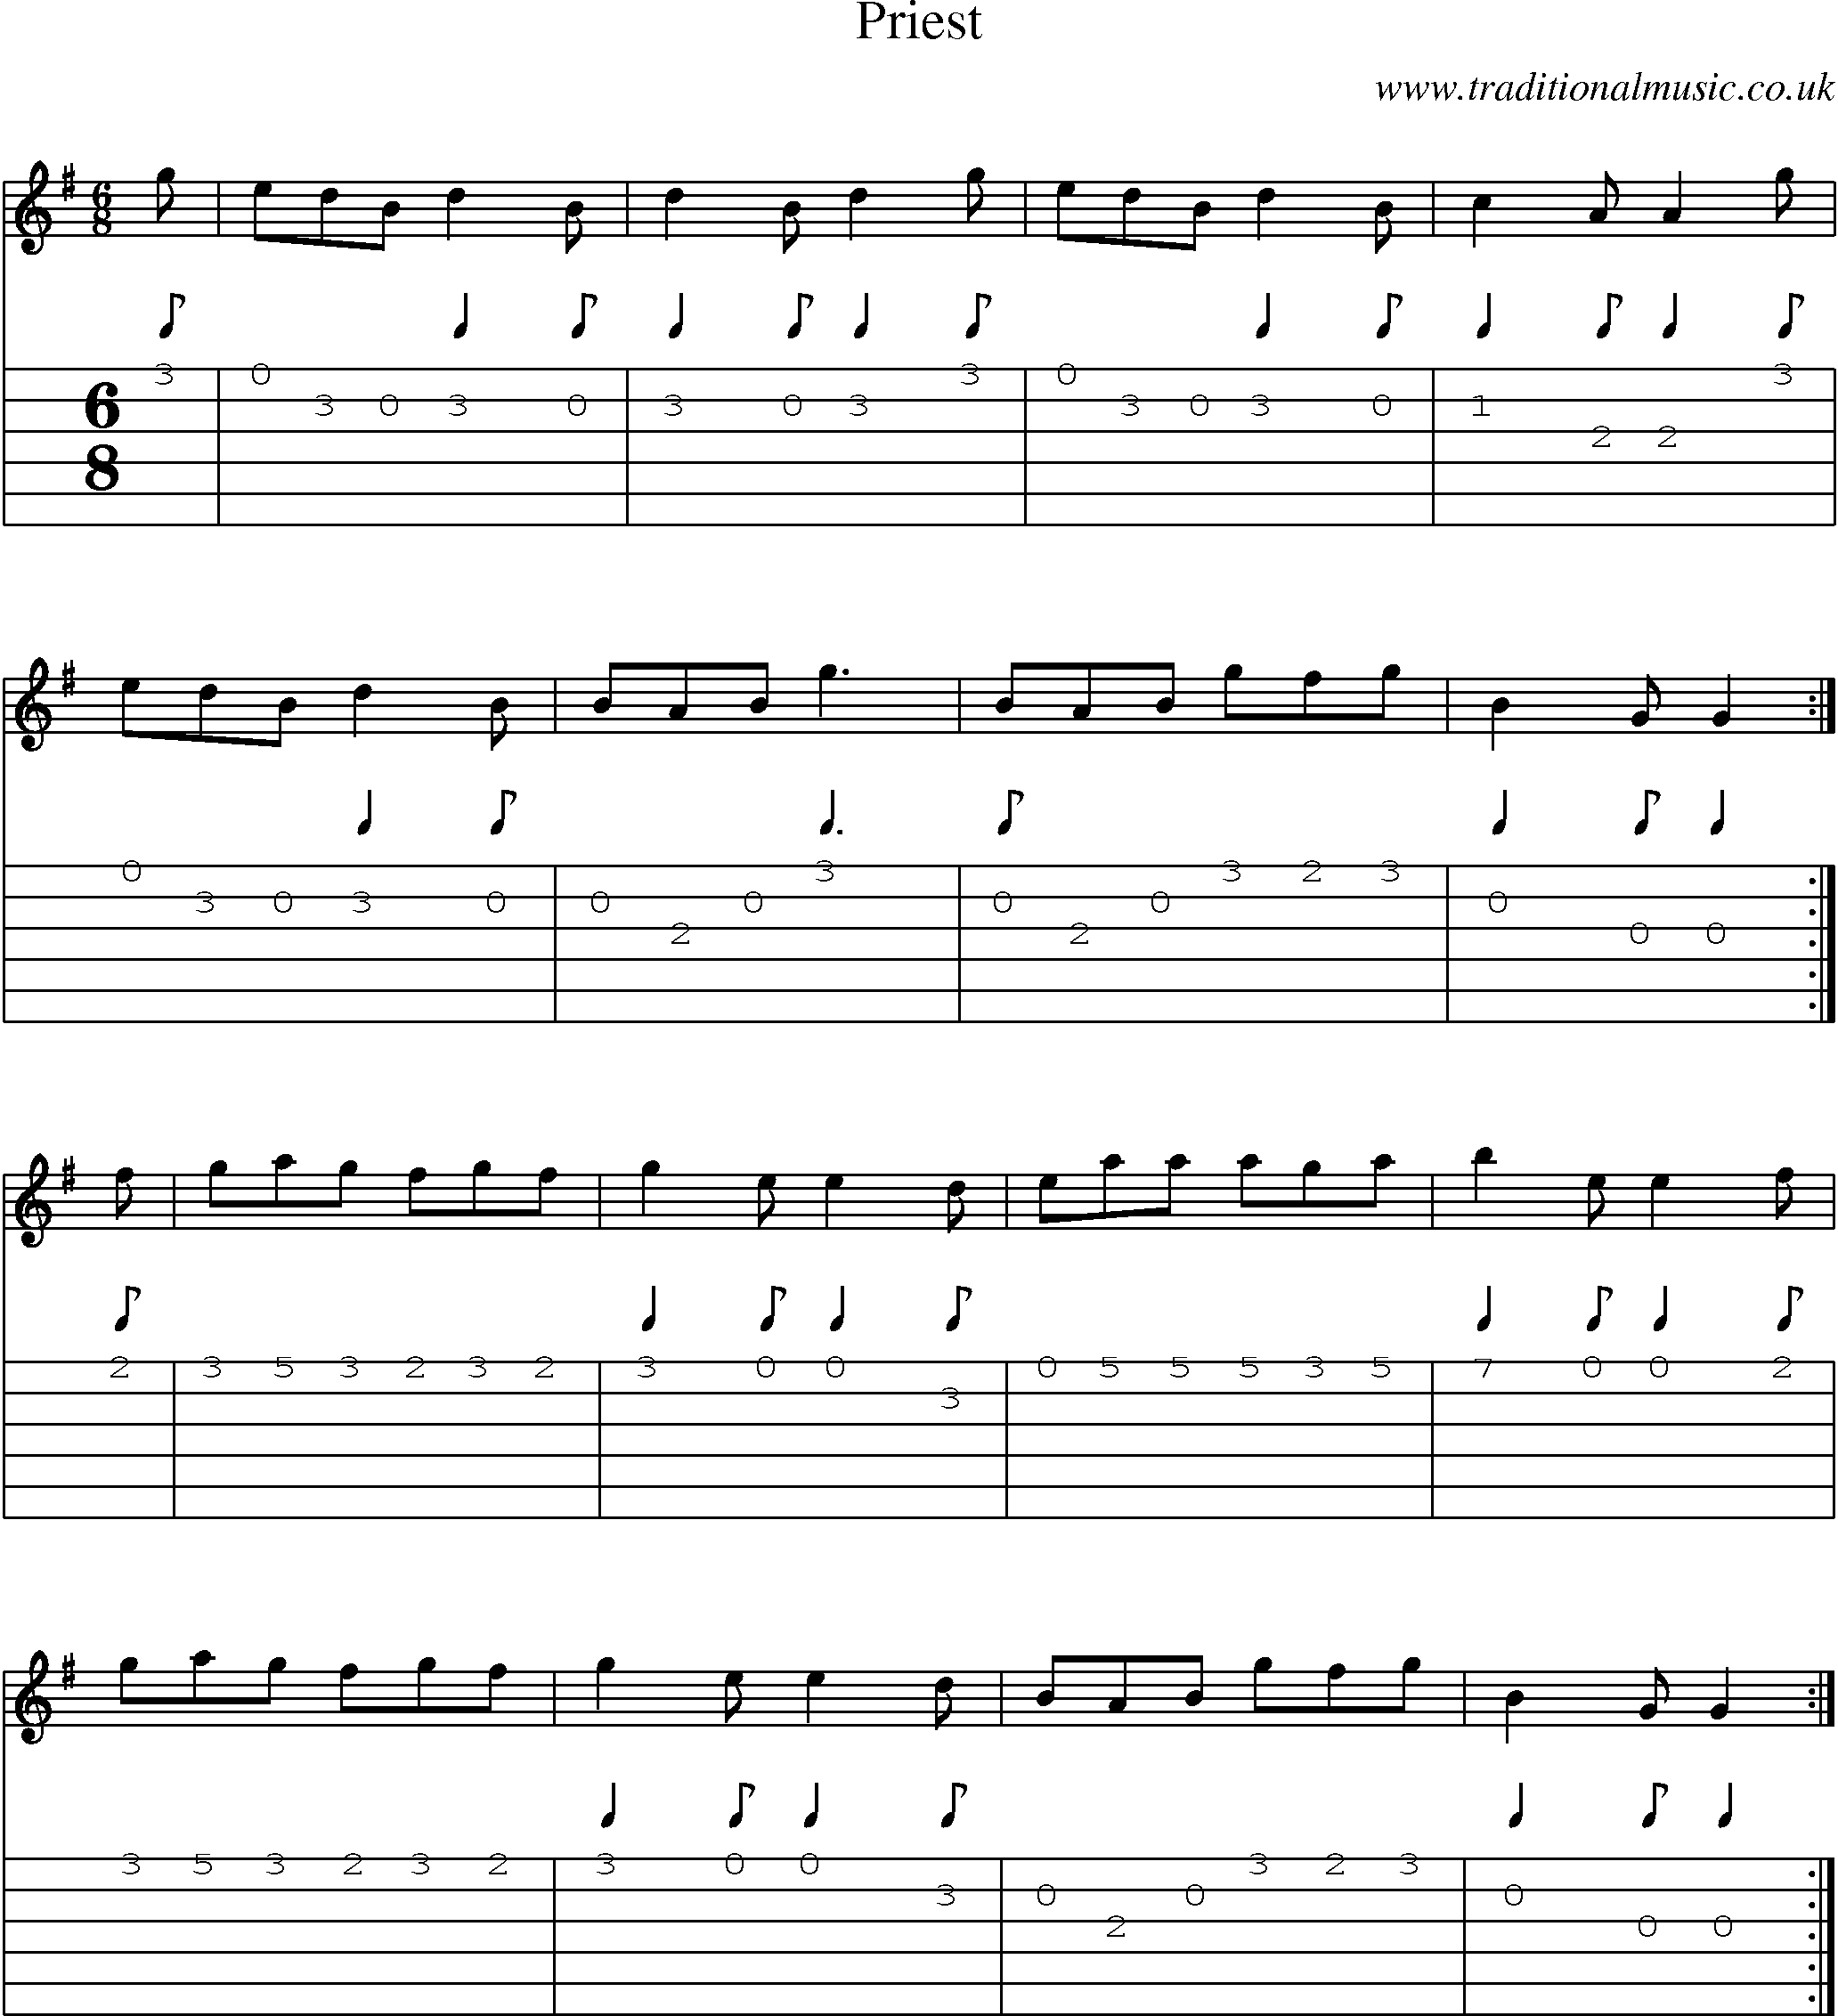 Music Score and Guitar Tabs for Priest